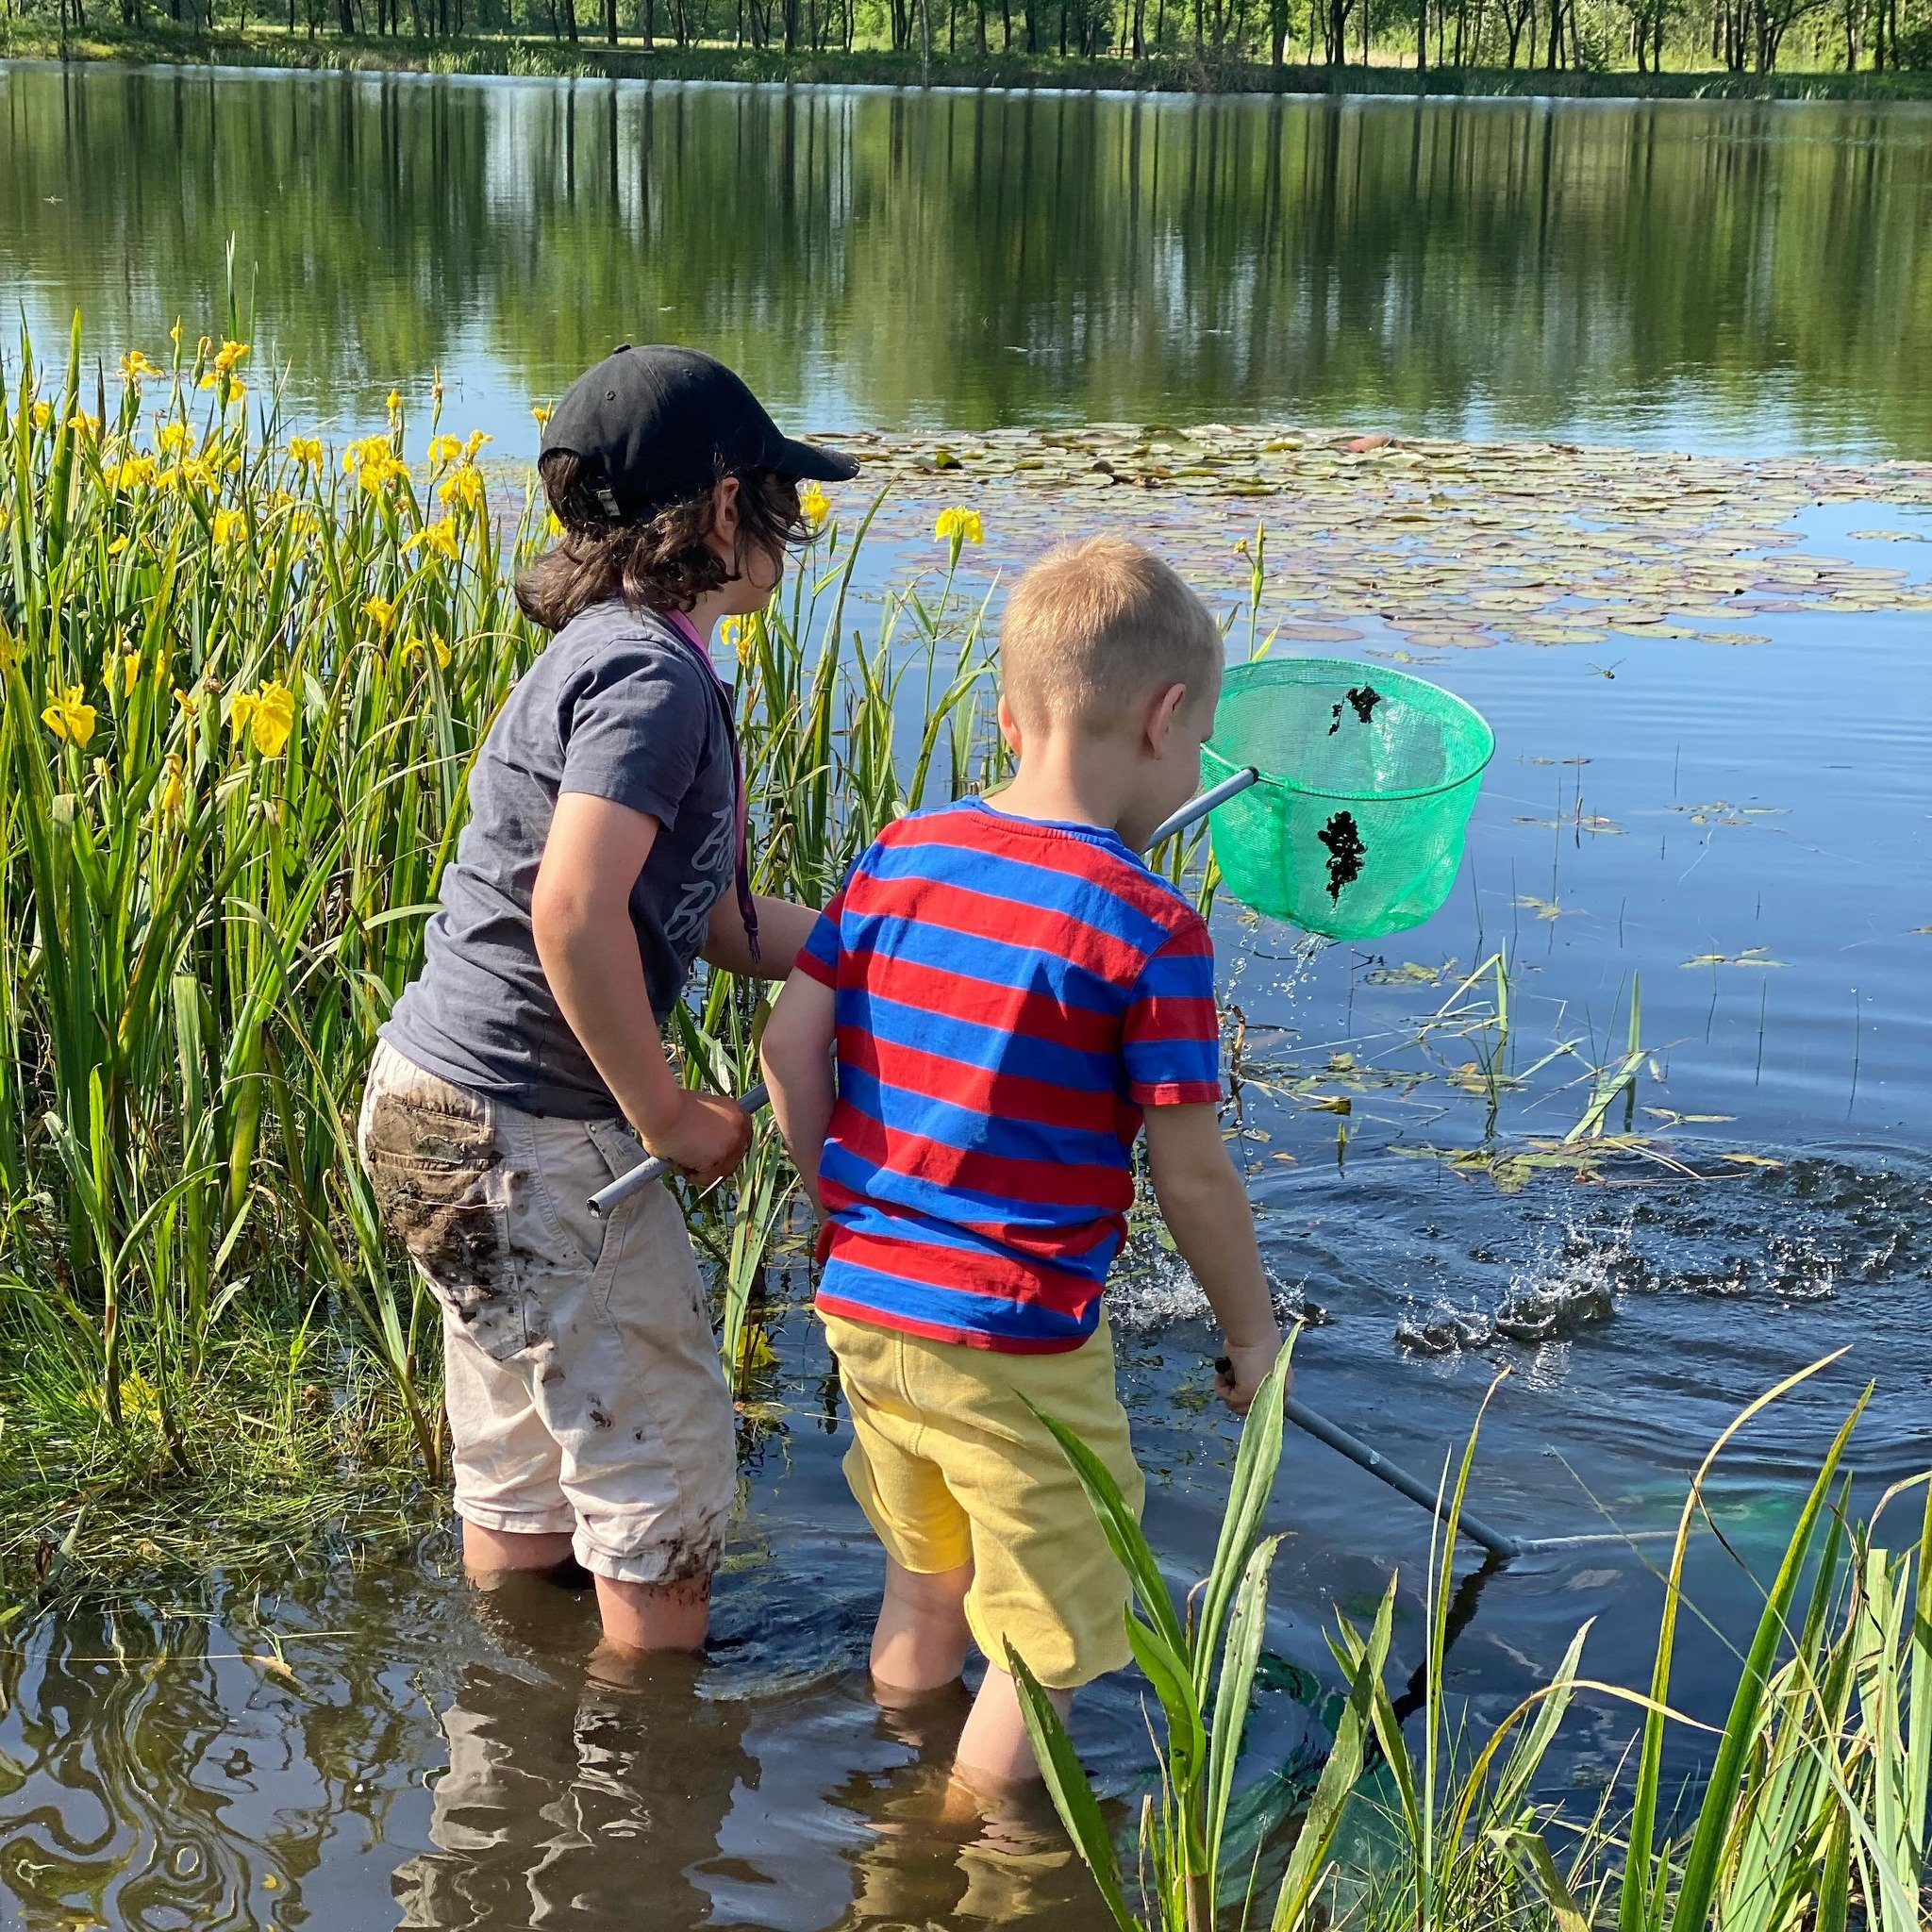 Lovely hygge moment @hyggelake where kids can still be kids 💚❤️💙 #boys #fishing #goodtimes #goodmoments  #campinglife #camping #welovecamping #hygge #ownlake #hyggehygge #denmark #denmarklove #hyggelife #hyggelake #lakeview #campingindenmark #newca